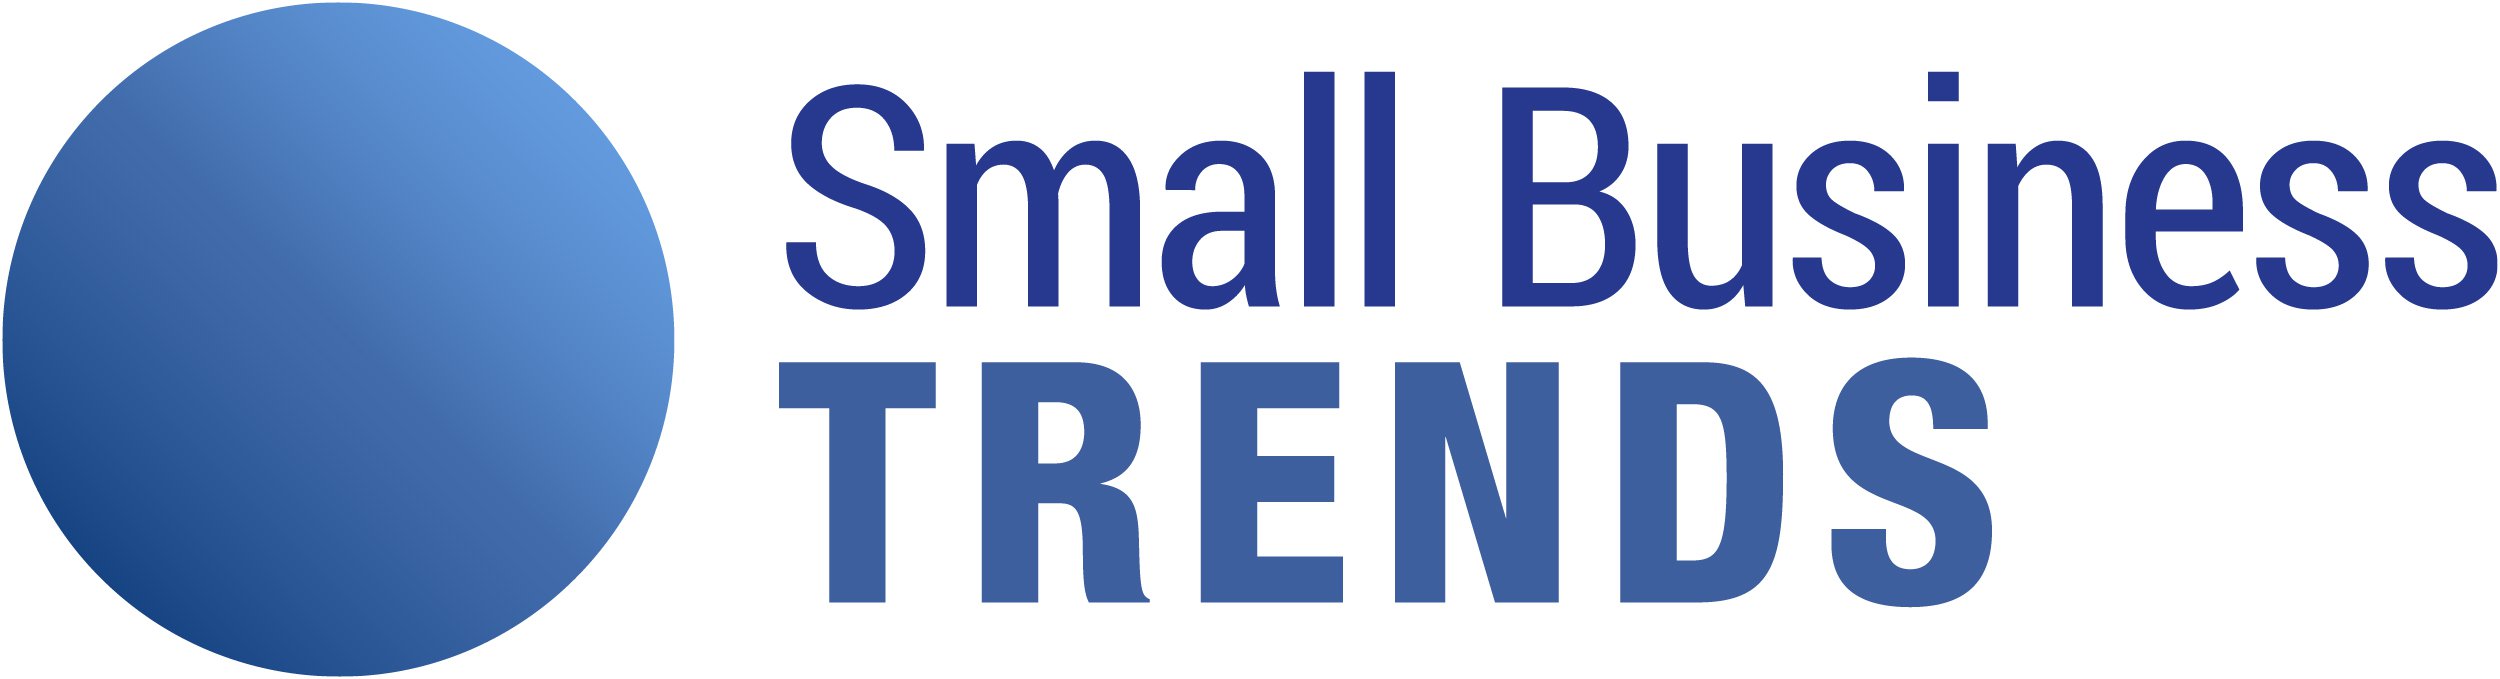 Business Trends Logo photo - 1